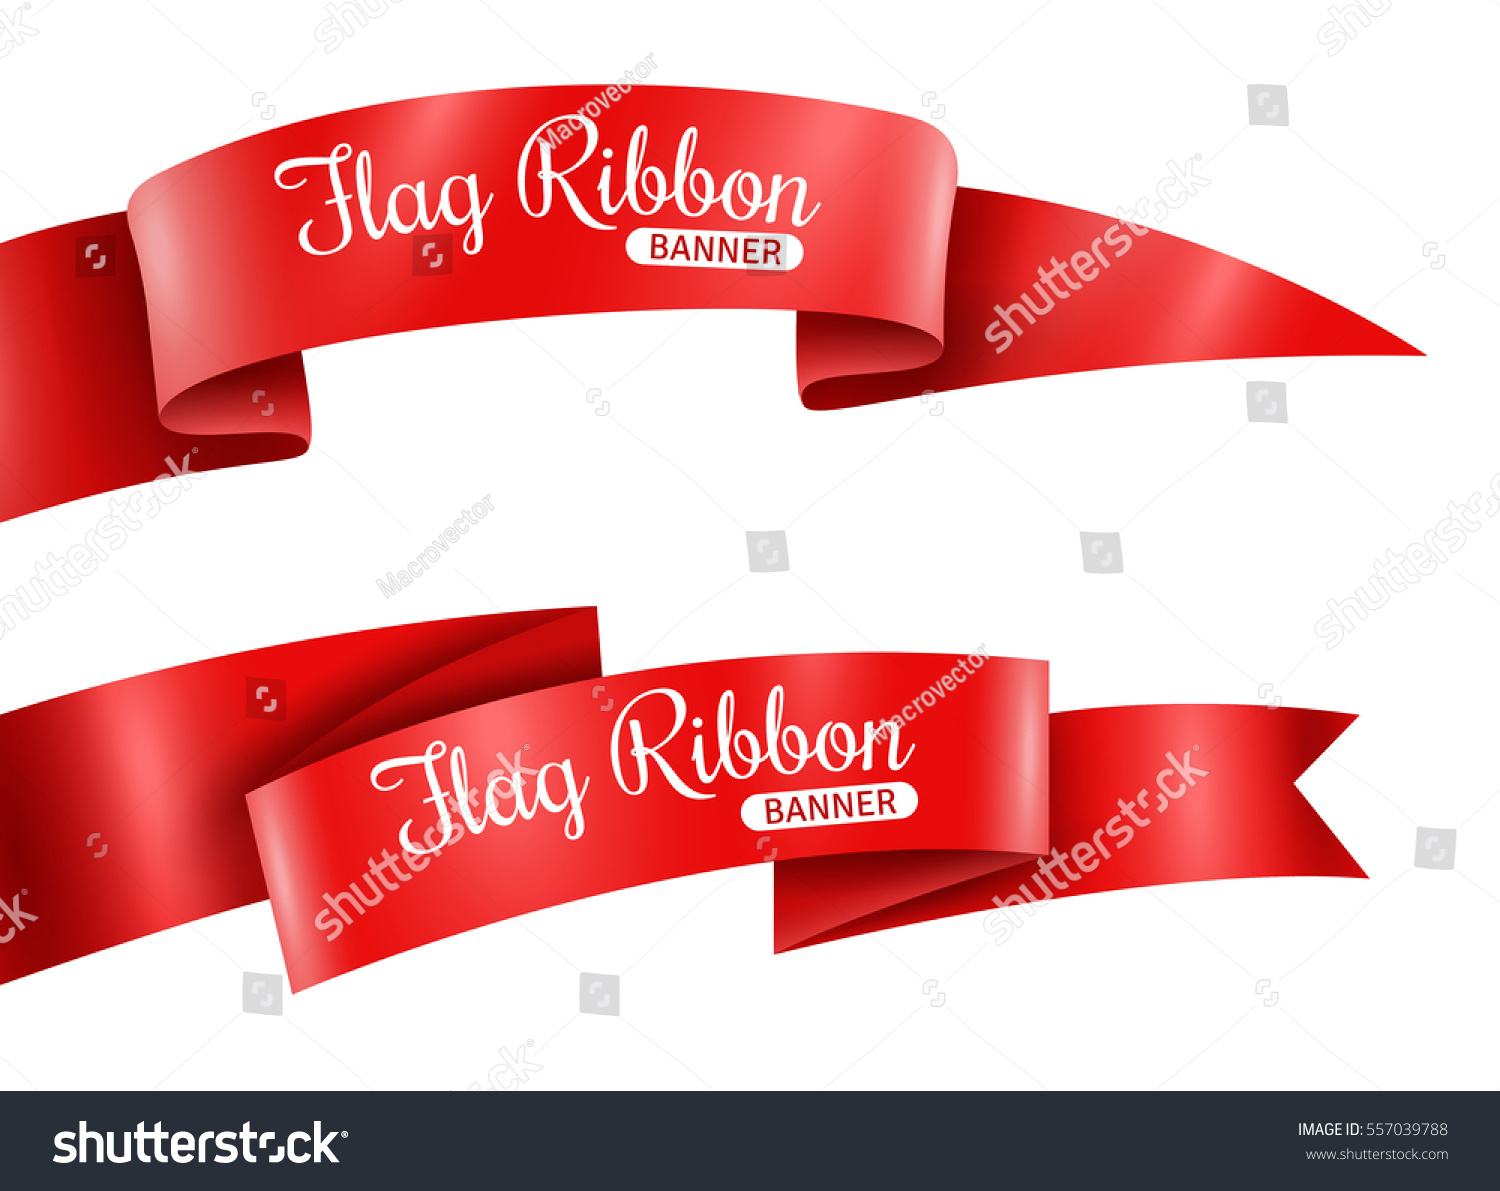 Red ribbons horizontal banners set flat isolated vector illustration #557039788